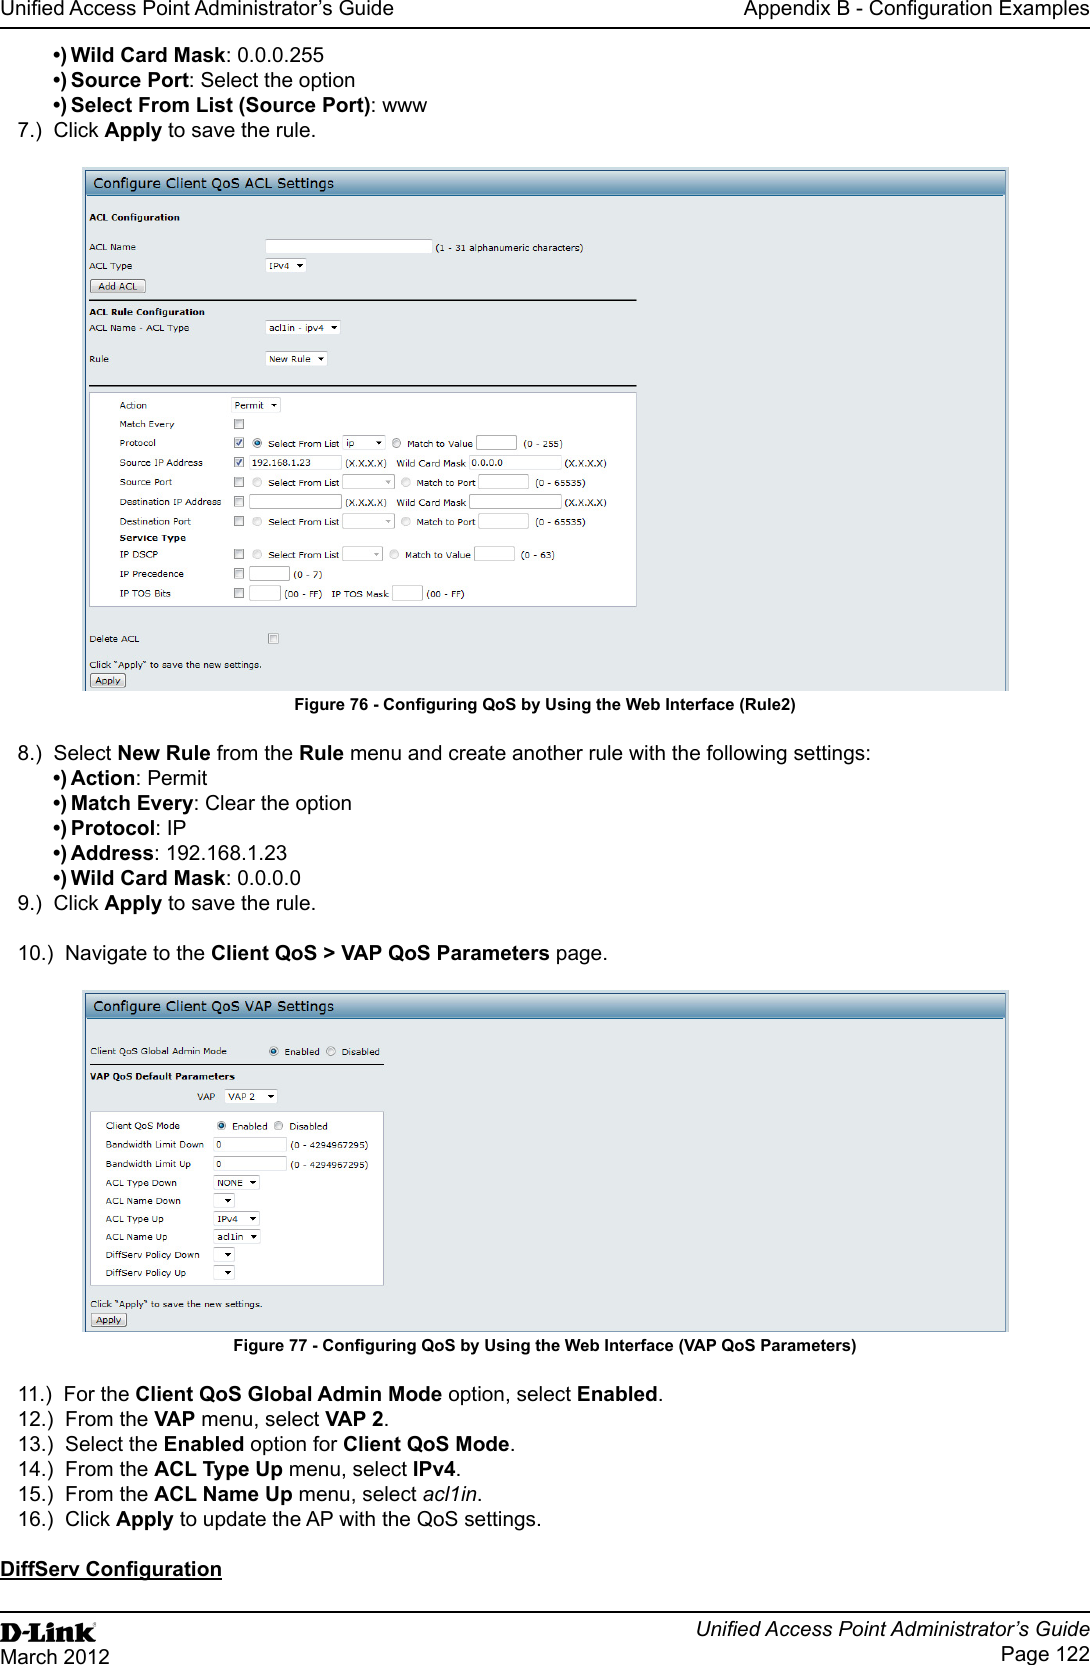 Unied Access Point Administrator’s GuideUnied Access Point Administrator’s GuidePage 122March 2012Appendix B - Conguration Examples•) Wild Card Mask: 0.0.0.255•) Source Port: Select the option•) Select From List (Source Port): www7.)  Click Apply to save the rule.Figure 76 - Conguring QoS by Using the Web Interface (Rule2)8.)  Select New Rule from the Rule menu and create another rule with the following settings:•) Action: Permit•) Match Every: Clear the option•) Protocol: IP•) Address: 192.168.1.23•) Wild Card Mask: 0.0.0.09.)  Click Apply to save the rule.10.)  Navigate to the Client QoS &gt; VAP QoS Parameters page.Figure 77 - Conguring QoS by Using the Web Interface (VAP QoS Parameters)11.)  For the Client QoS Global Admin Mode option, select Enabled.12.)  From the VAP menu, select VAP 2.13.)  Select the Enabled option for Client QoS Mode.14.)  From the ACL Type Up menu, select IPv4.15.)  From the ACL Name Up menu, select acl1in.16.)  Click Apply to update the AP with the QoS settings.DiffServ Conguration